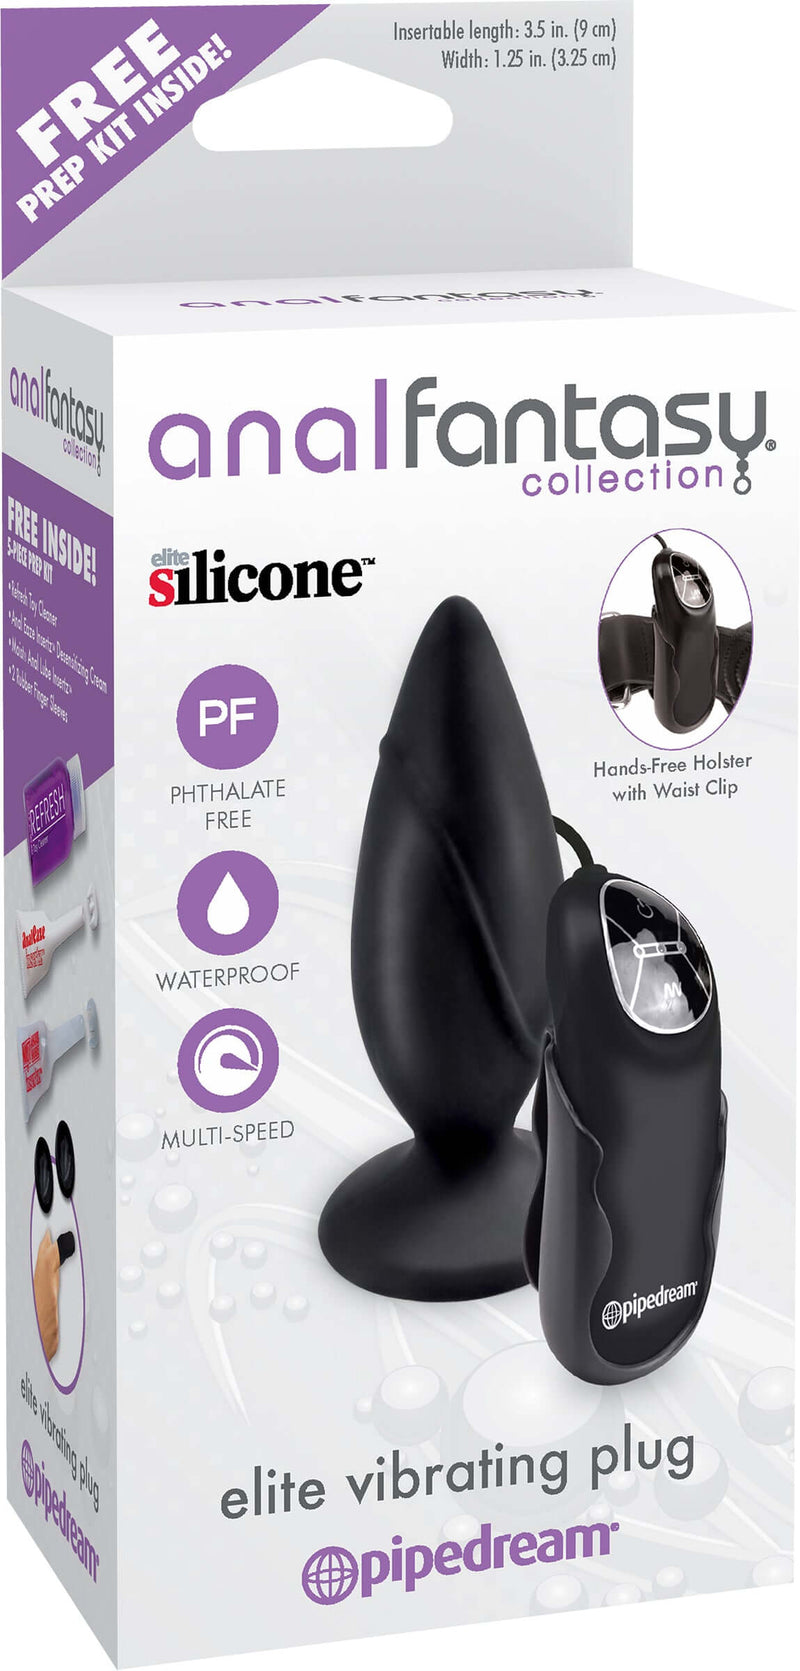 Pipedream Products Anal Fantasy Elite Vibrating Plug at $34.99